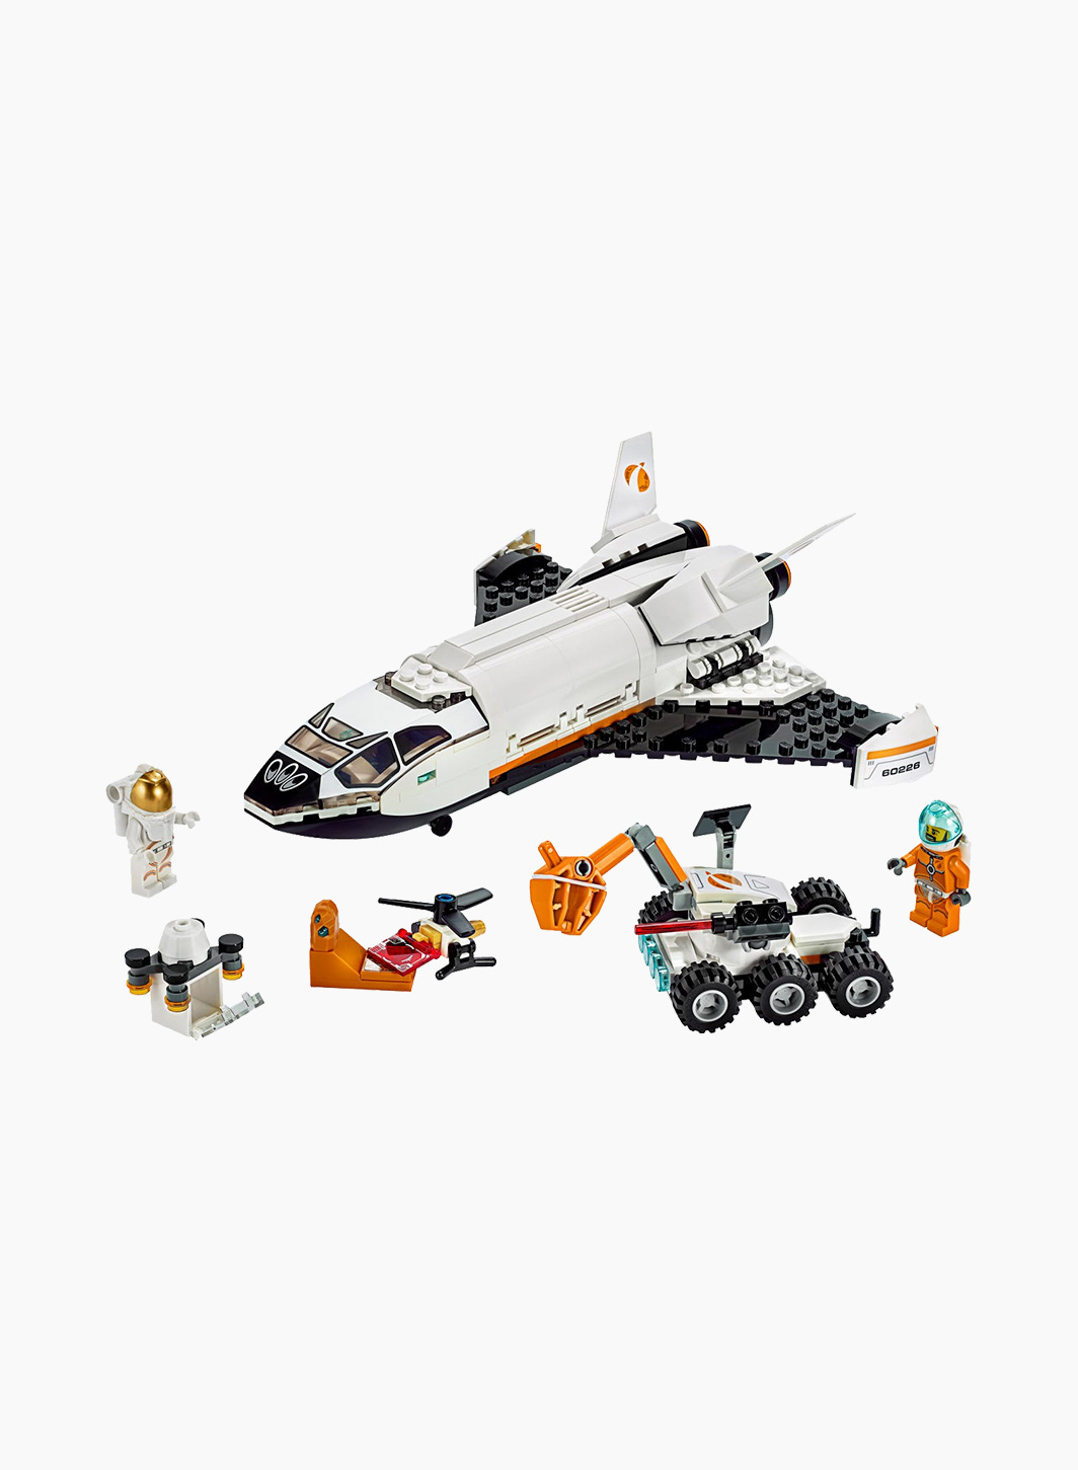 Lego City Constructor Mars Research Shuttle